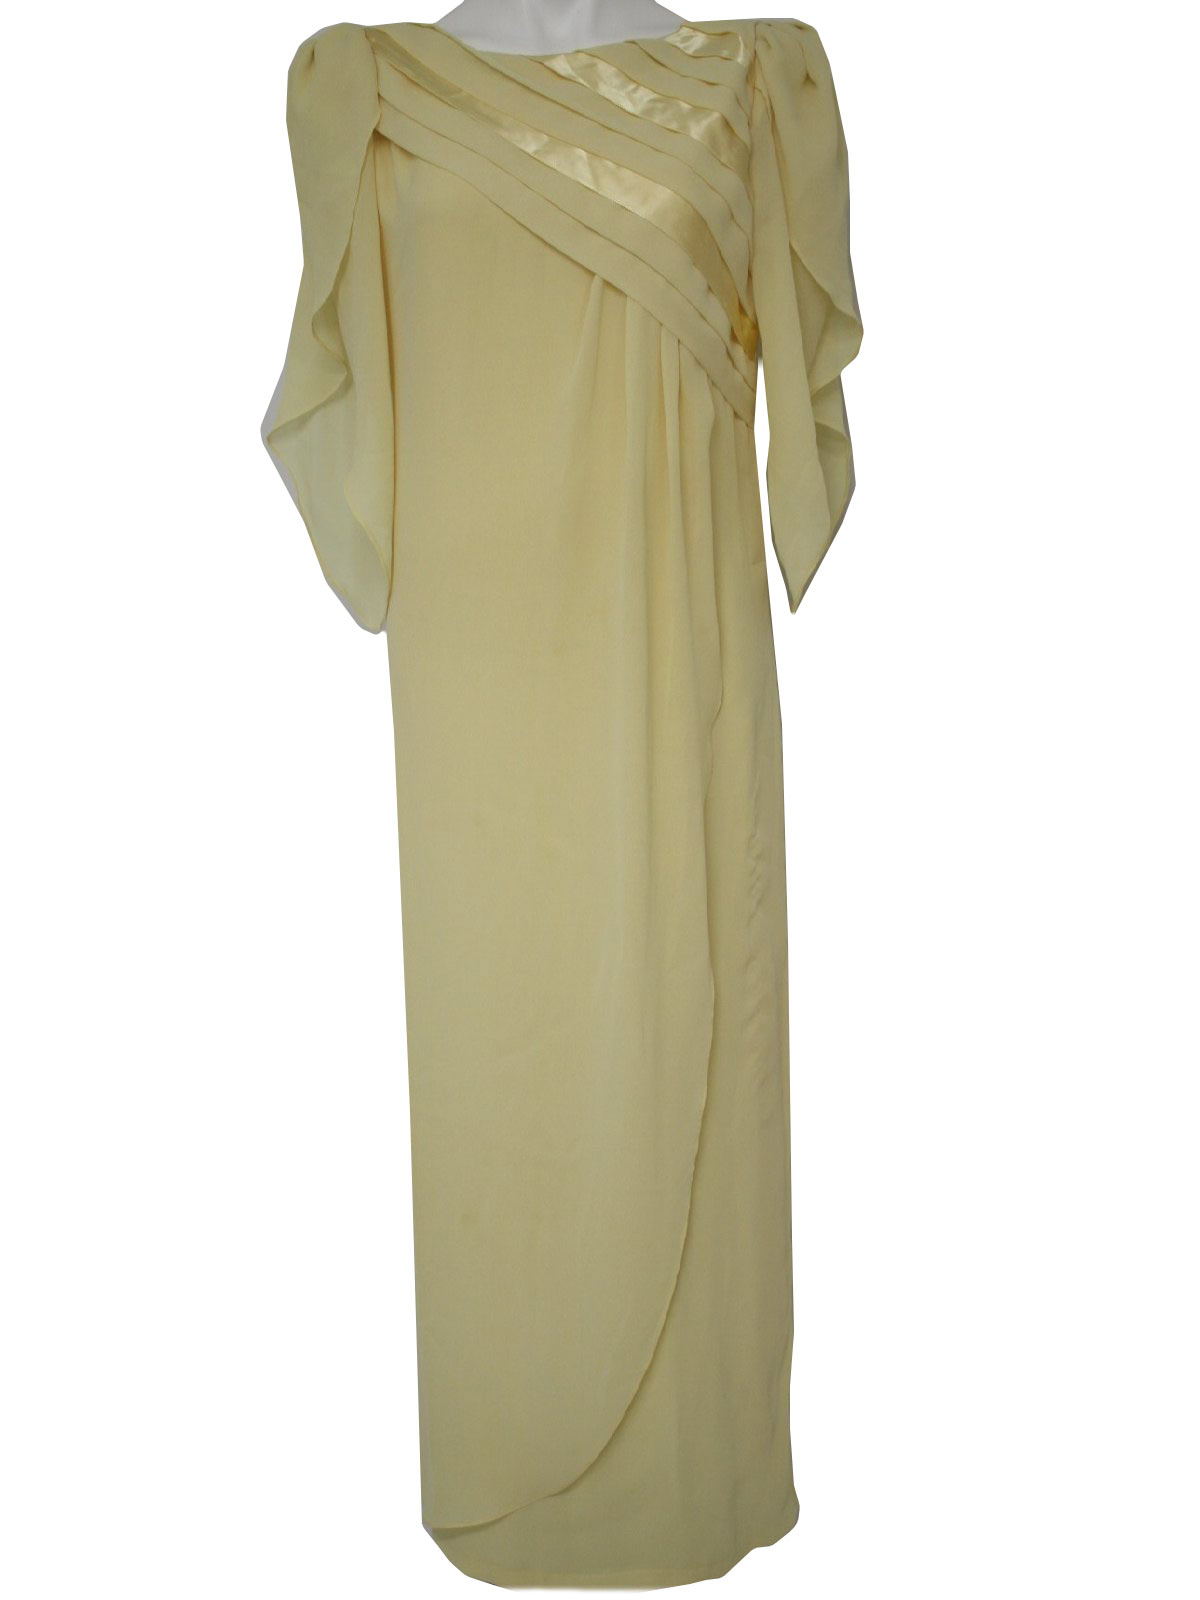 1970 s jcpenney disco cocktail dress 70s jcpenney womens baby yellow ...